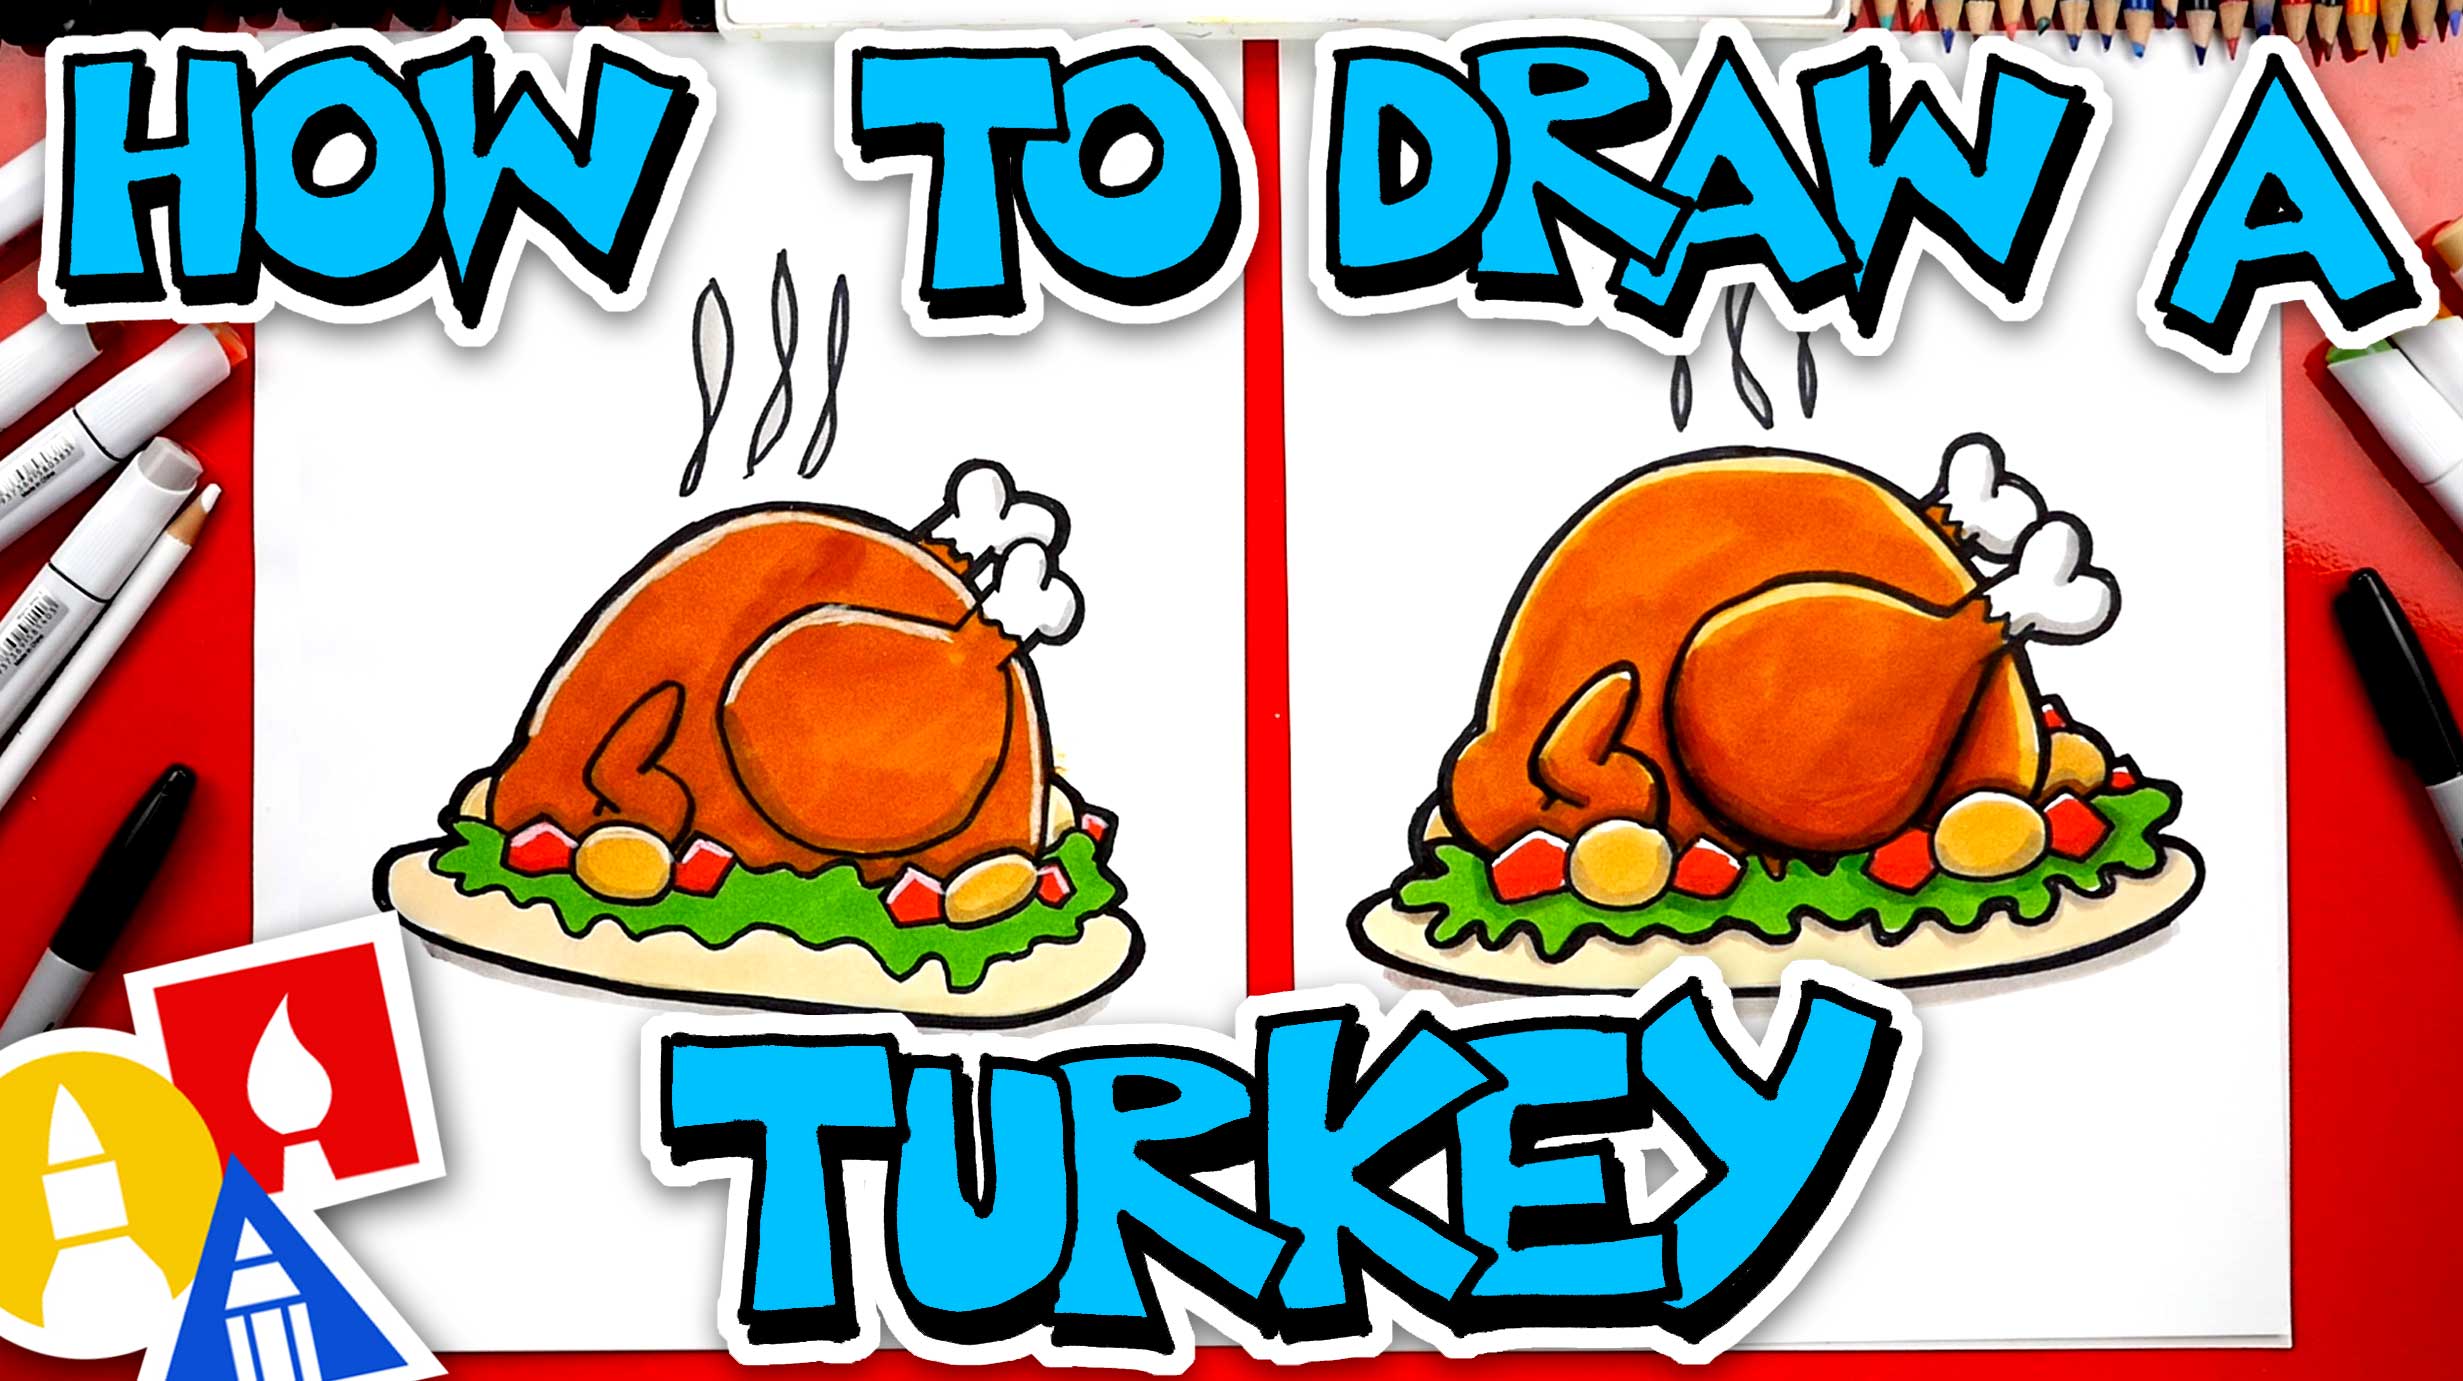 How To Draw A Cooked Turkey Art For Kids Hub